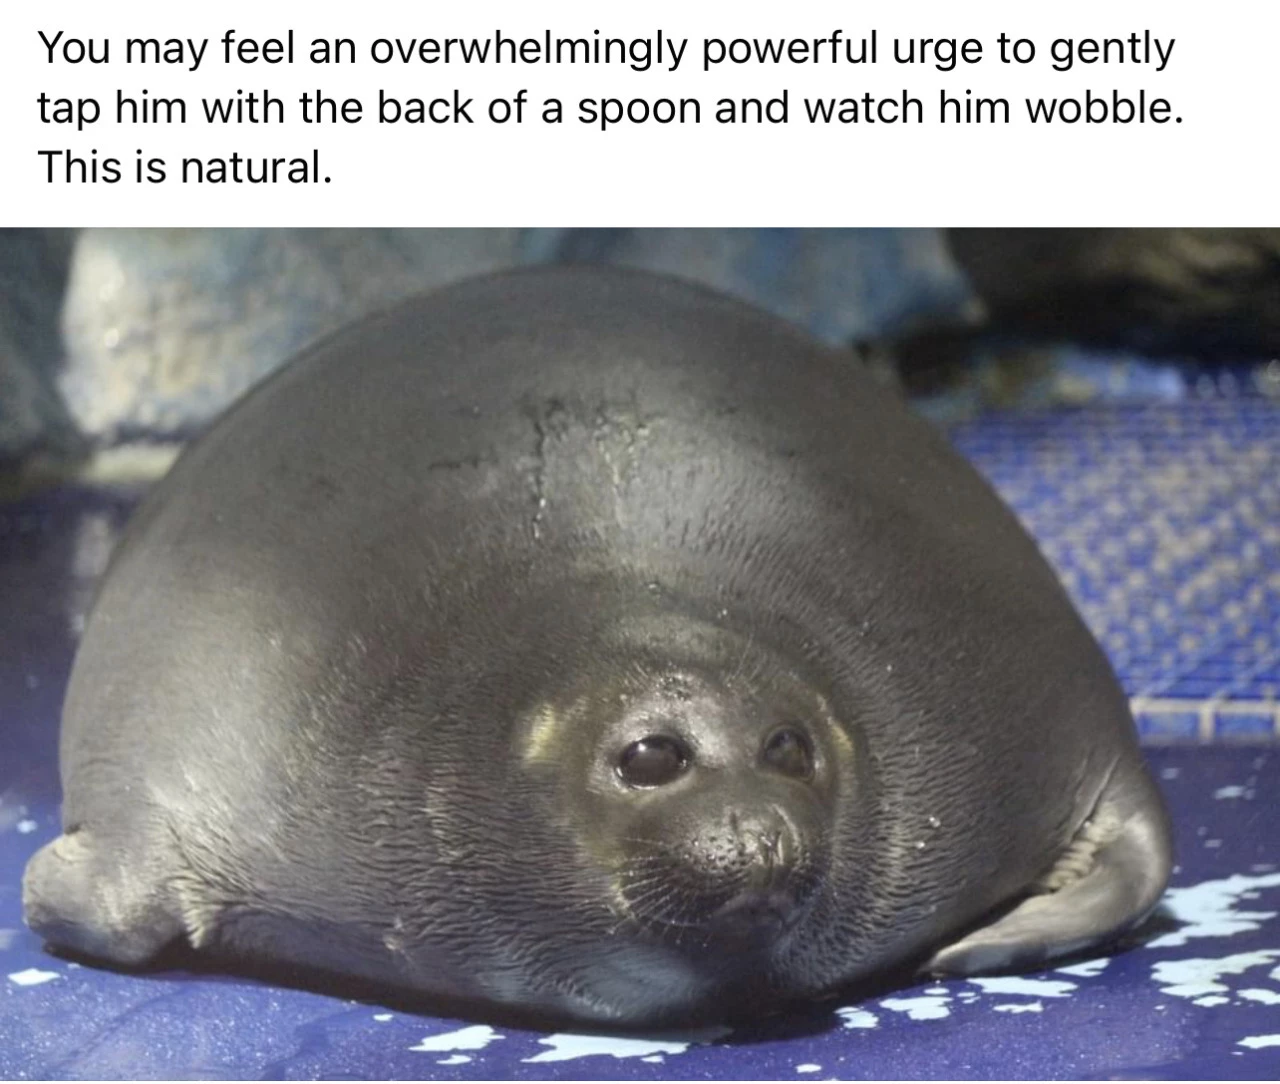 Why Are Seals Always This Chonky Though?